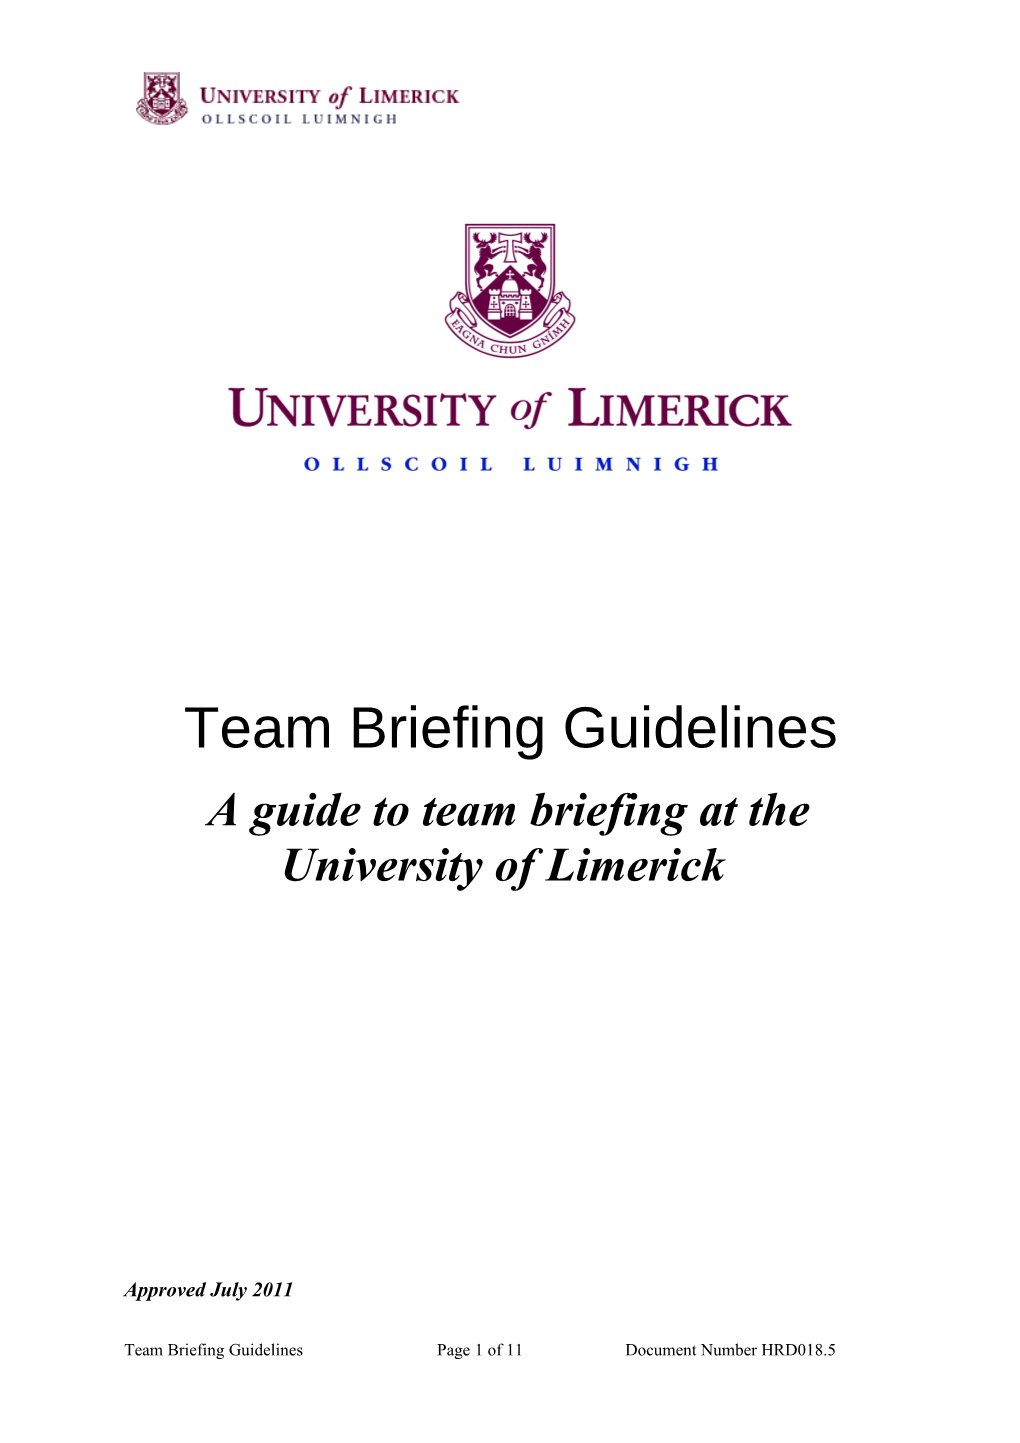 A Guide to Team Briefing Atthe University of Limerick